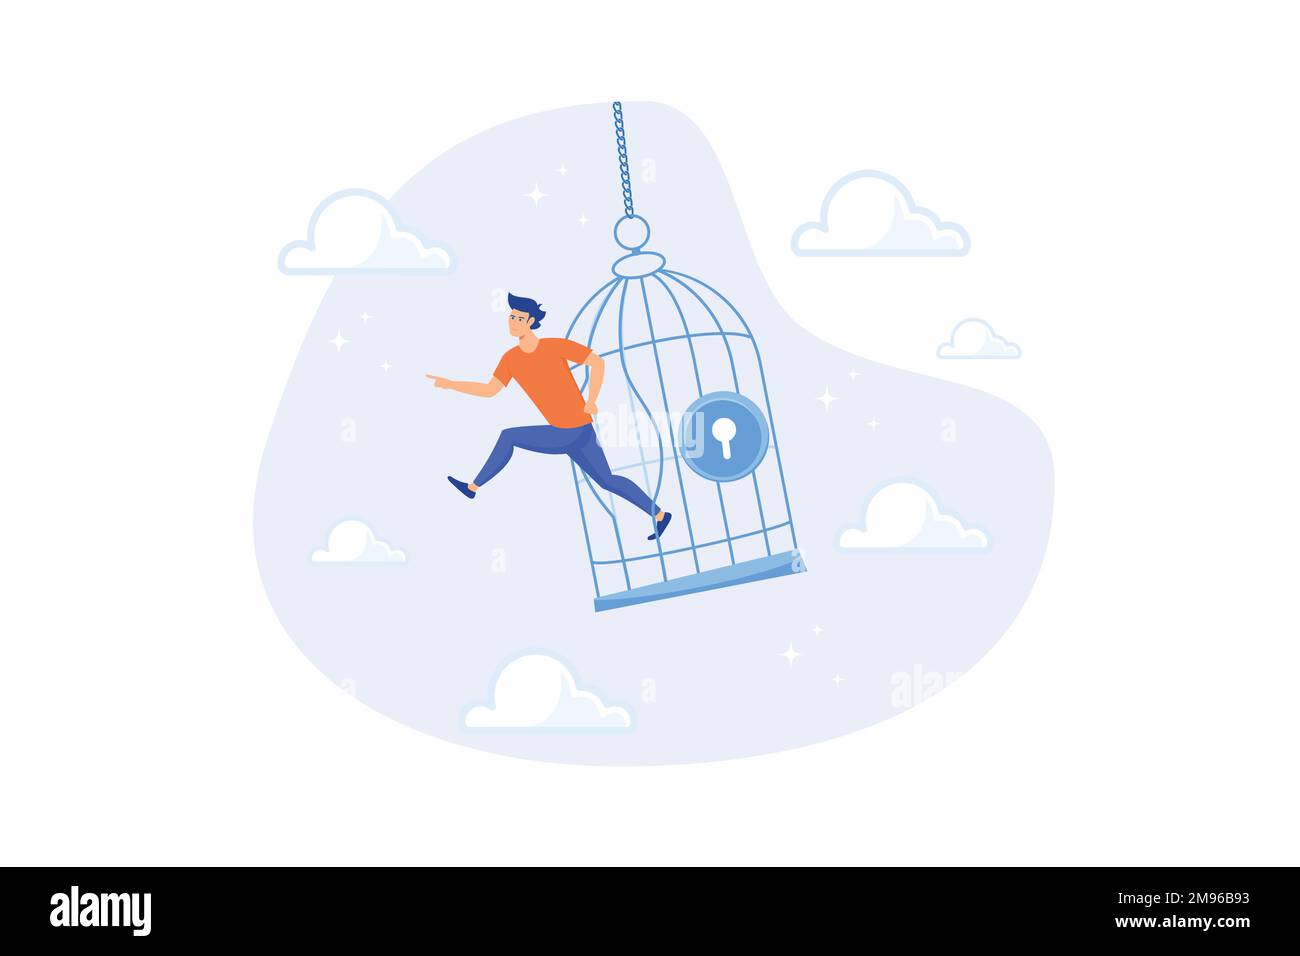 Courage to escape for freedom, get out of comfort zone to find new job, open mind or fly away for better life, hope and liberty concept, flat vector m Stock Vector